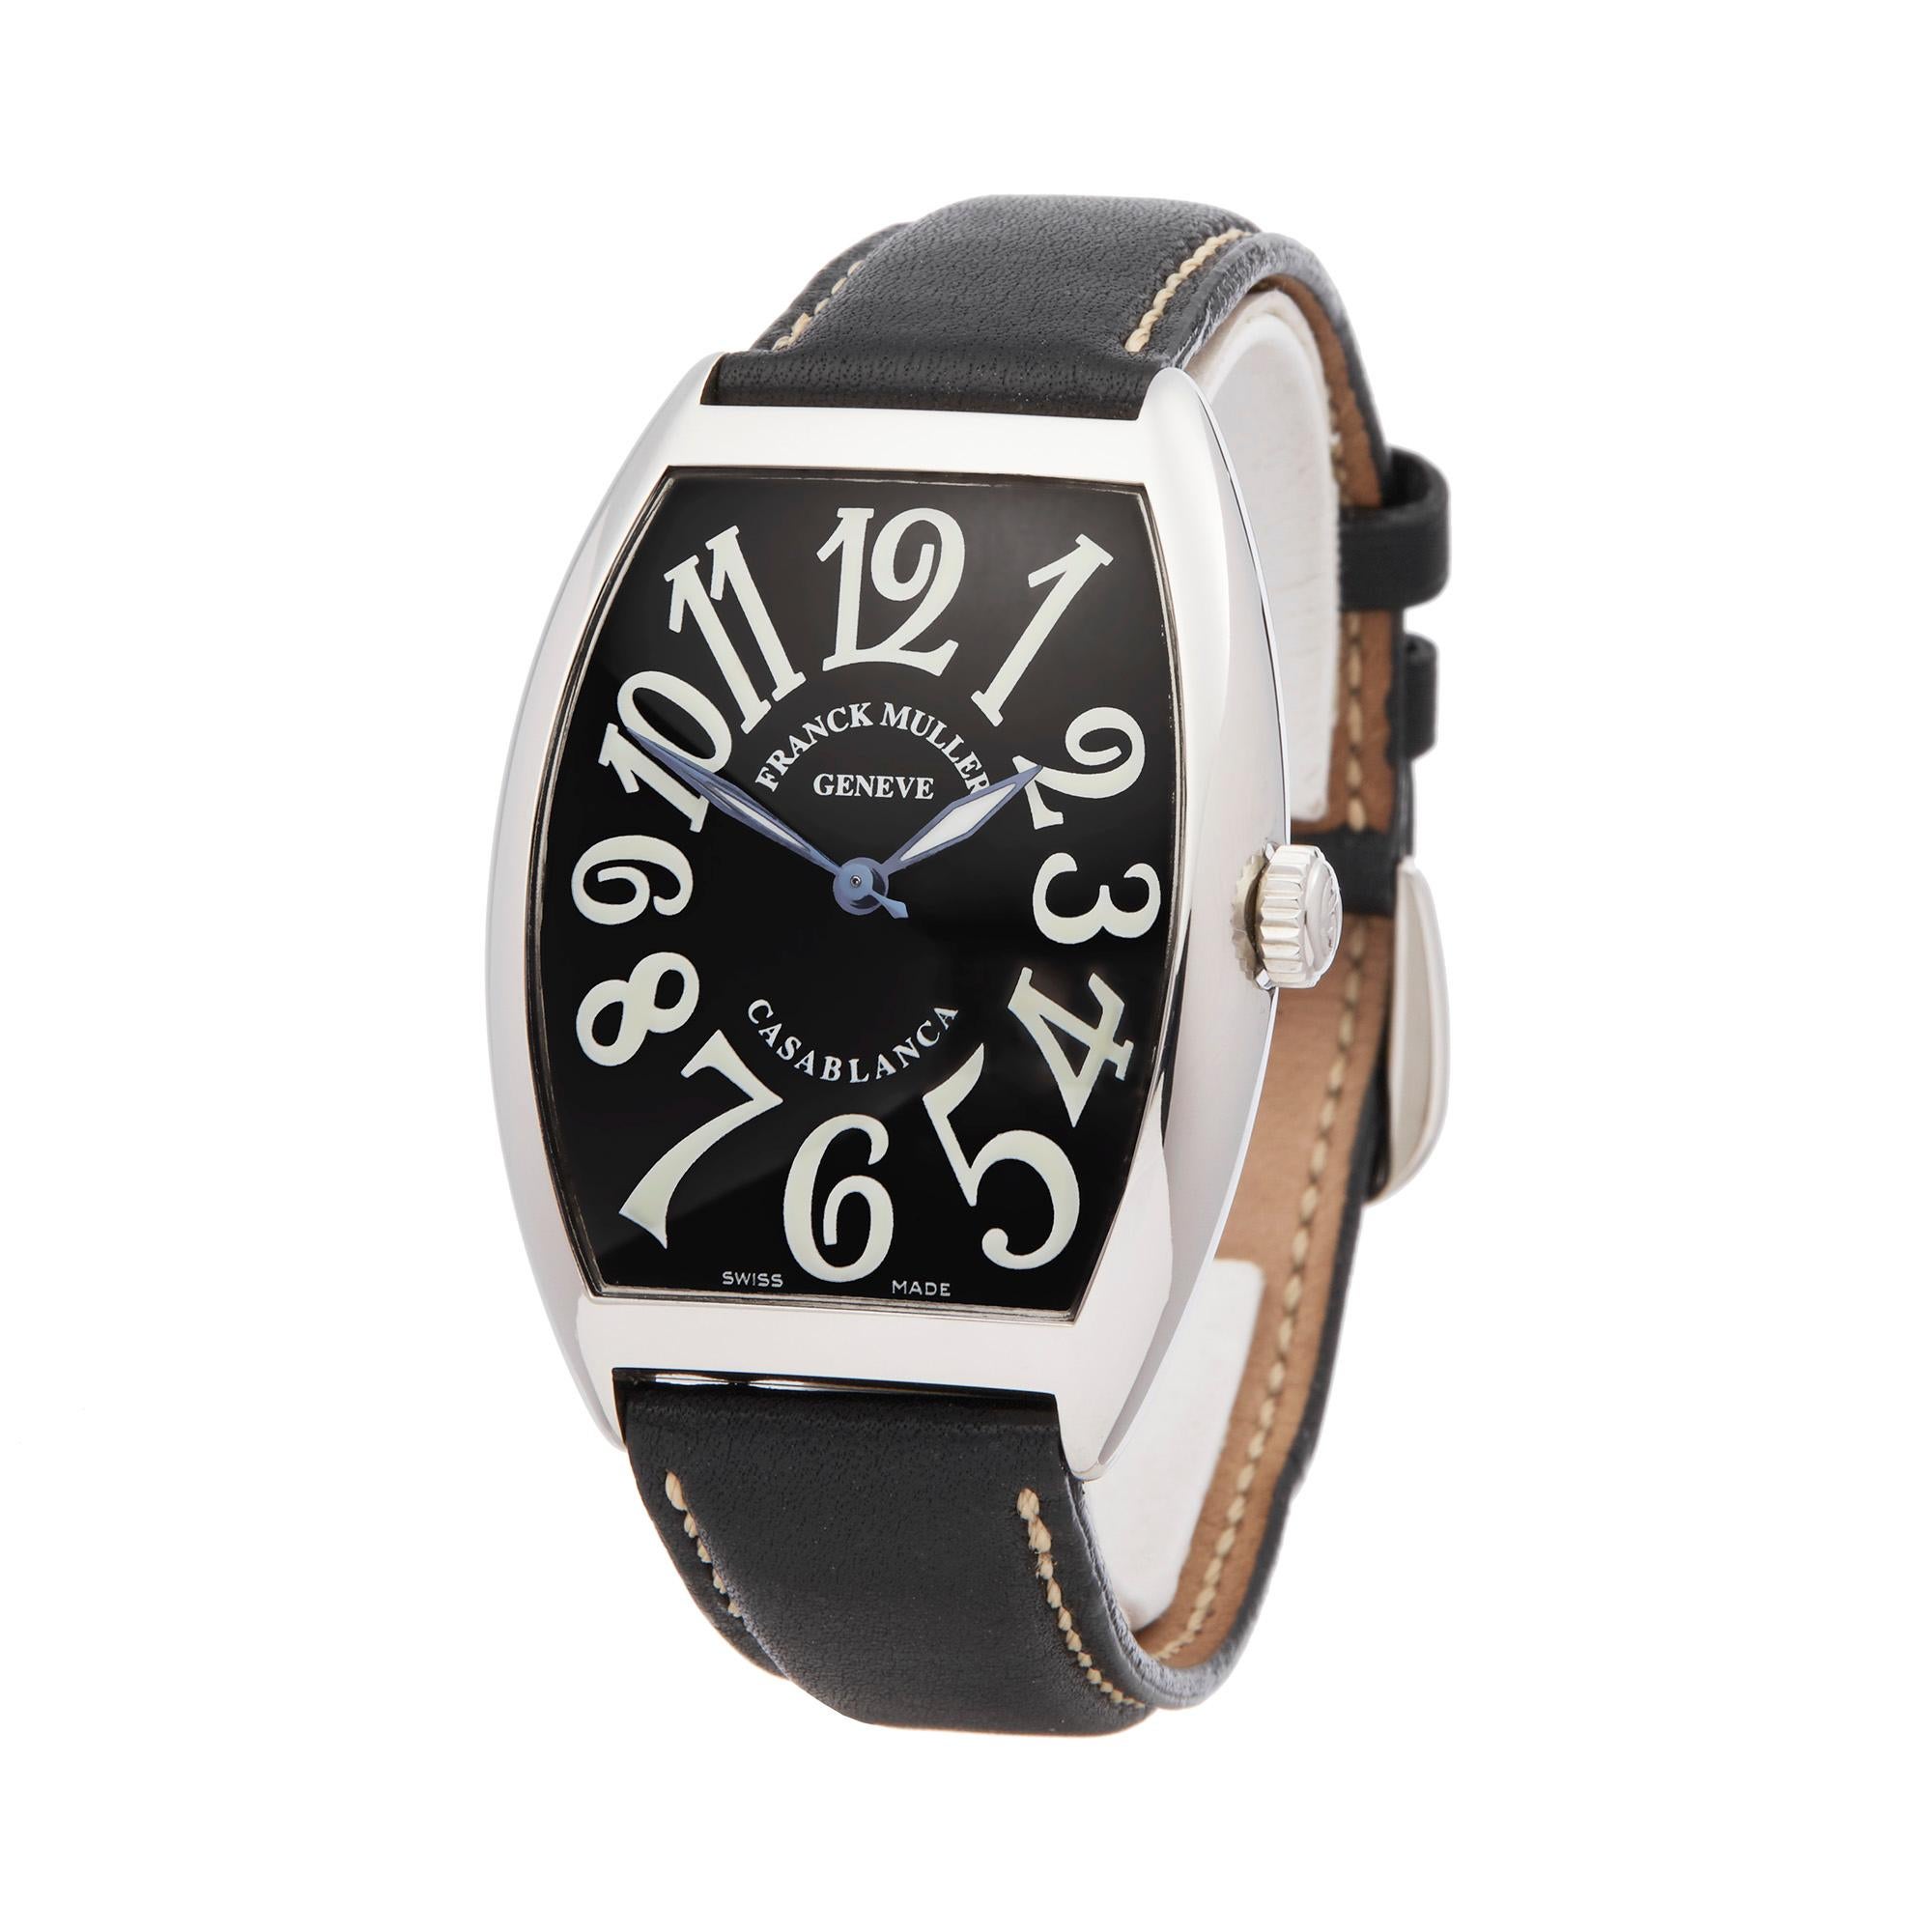 Reference: COM1955
Manufacturer: Franck Muller
Model: Master Banker
Model Reference: 6850
Age: Circa 2000's
Gender: Men's
Box and Papers: Presentation Box
Dial: Black Arabic
Glass: Sapphire Crystal
Movement: Automatic
Water Resistance: To